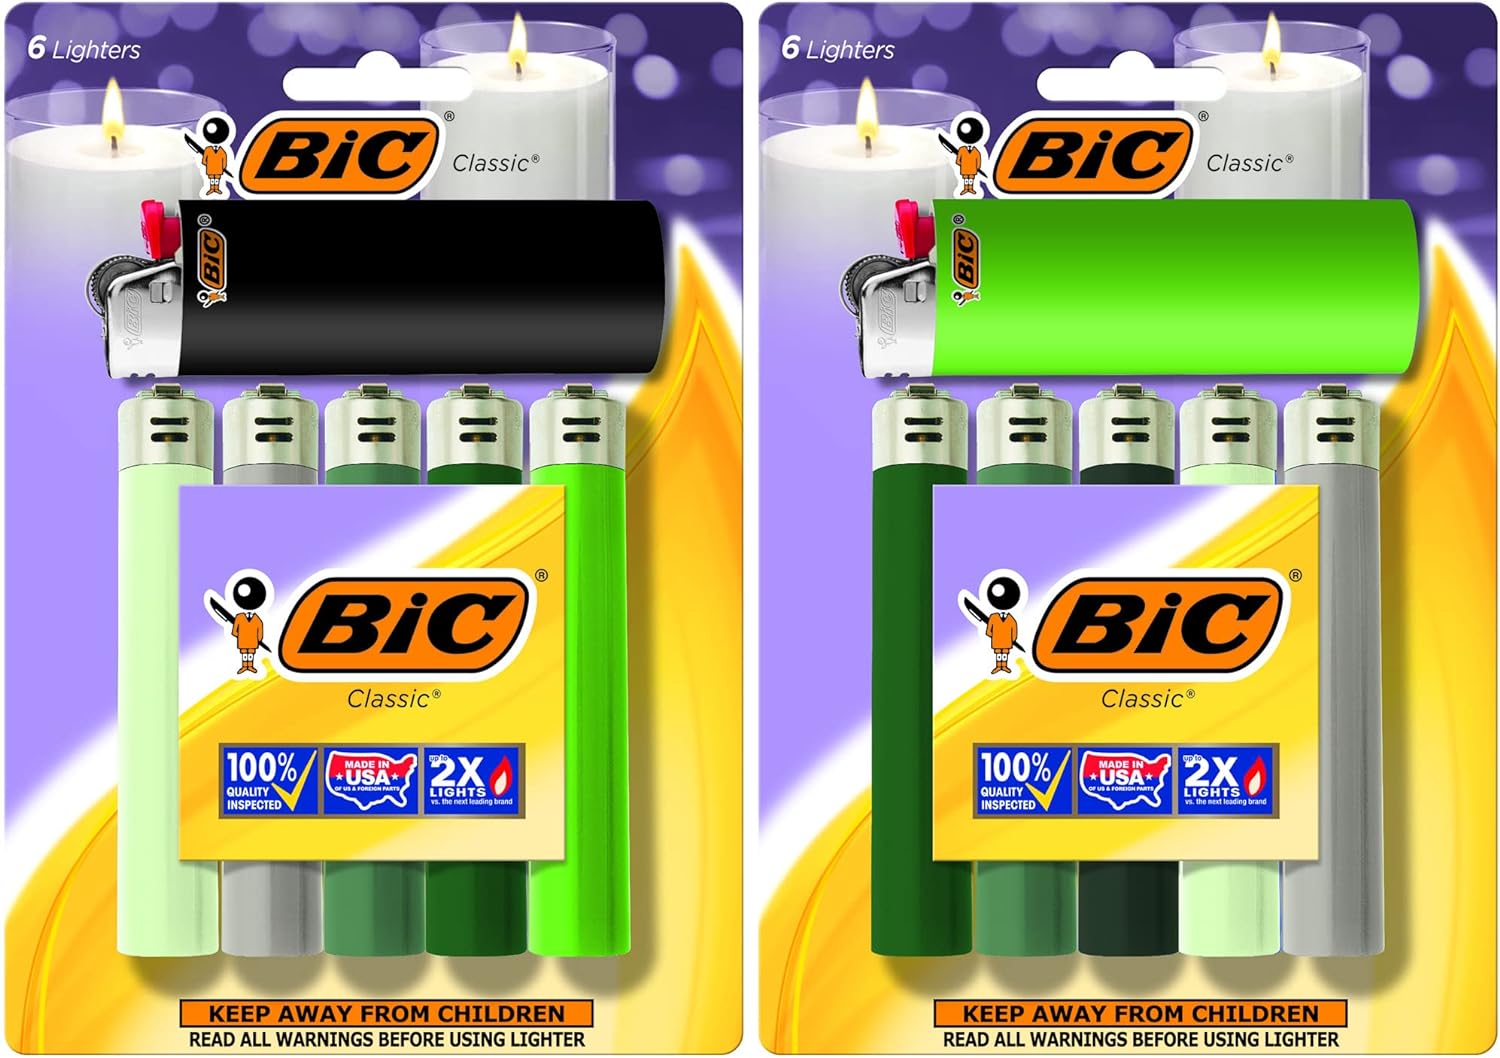 BIC Classic Lighter, Shades of Green, 12-Pack (Packaging and Colors May Vary)